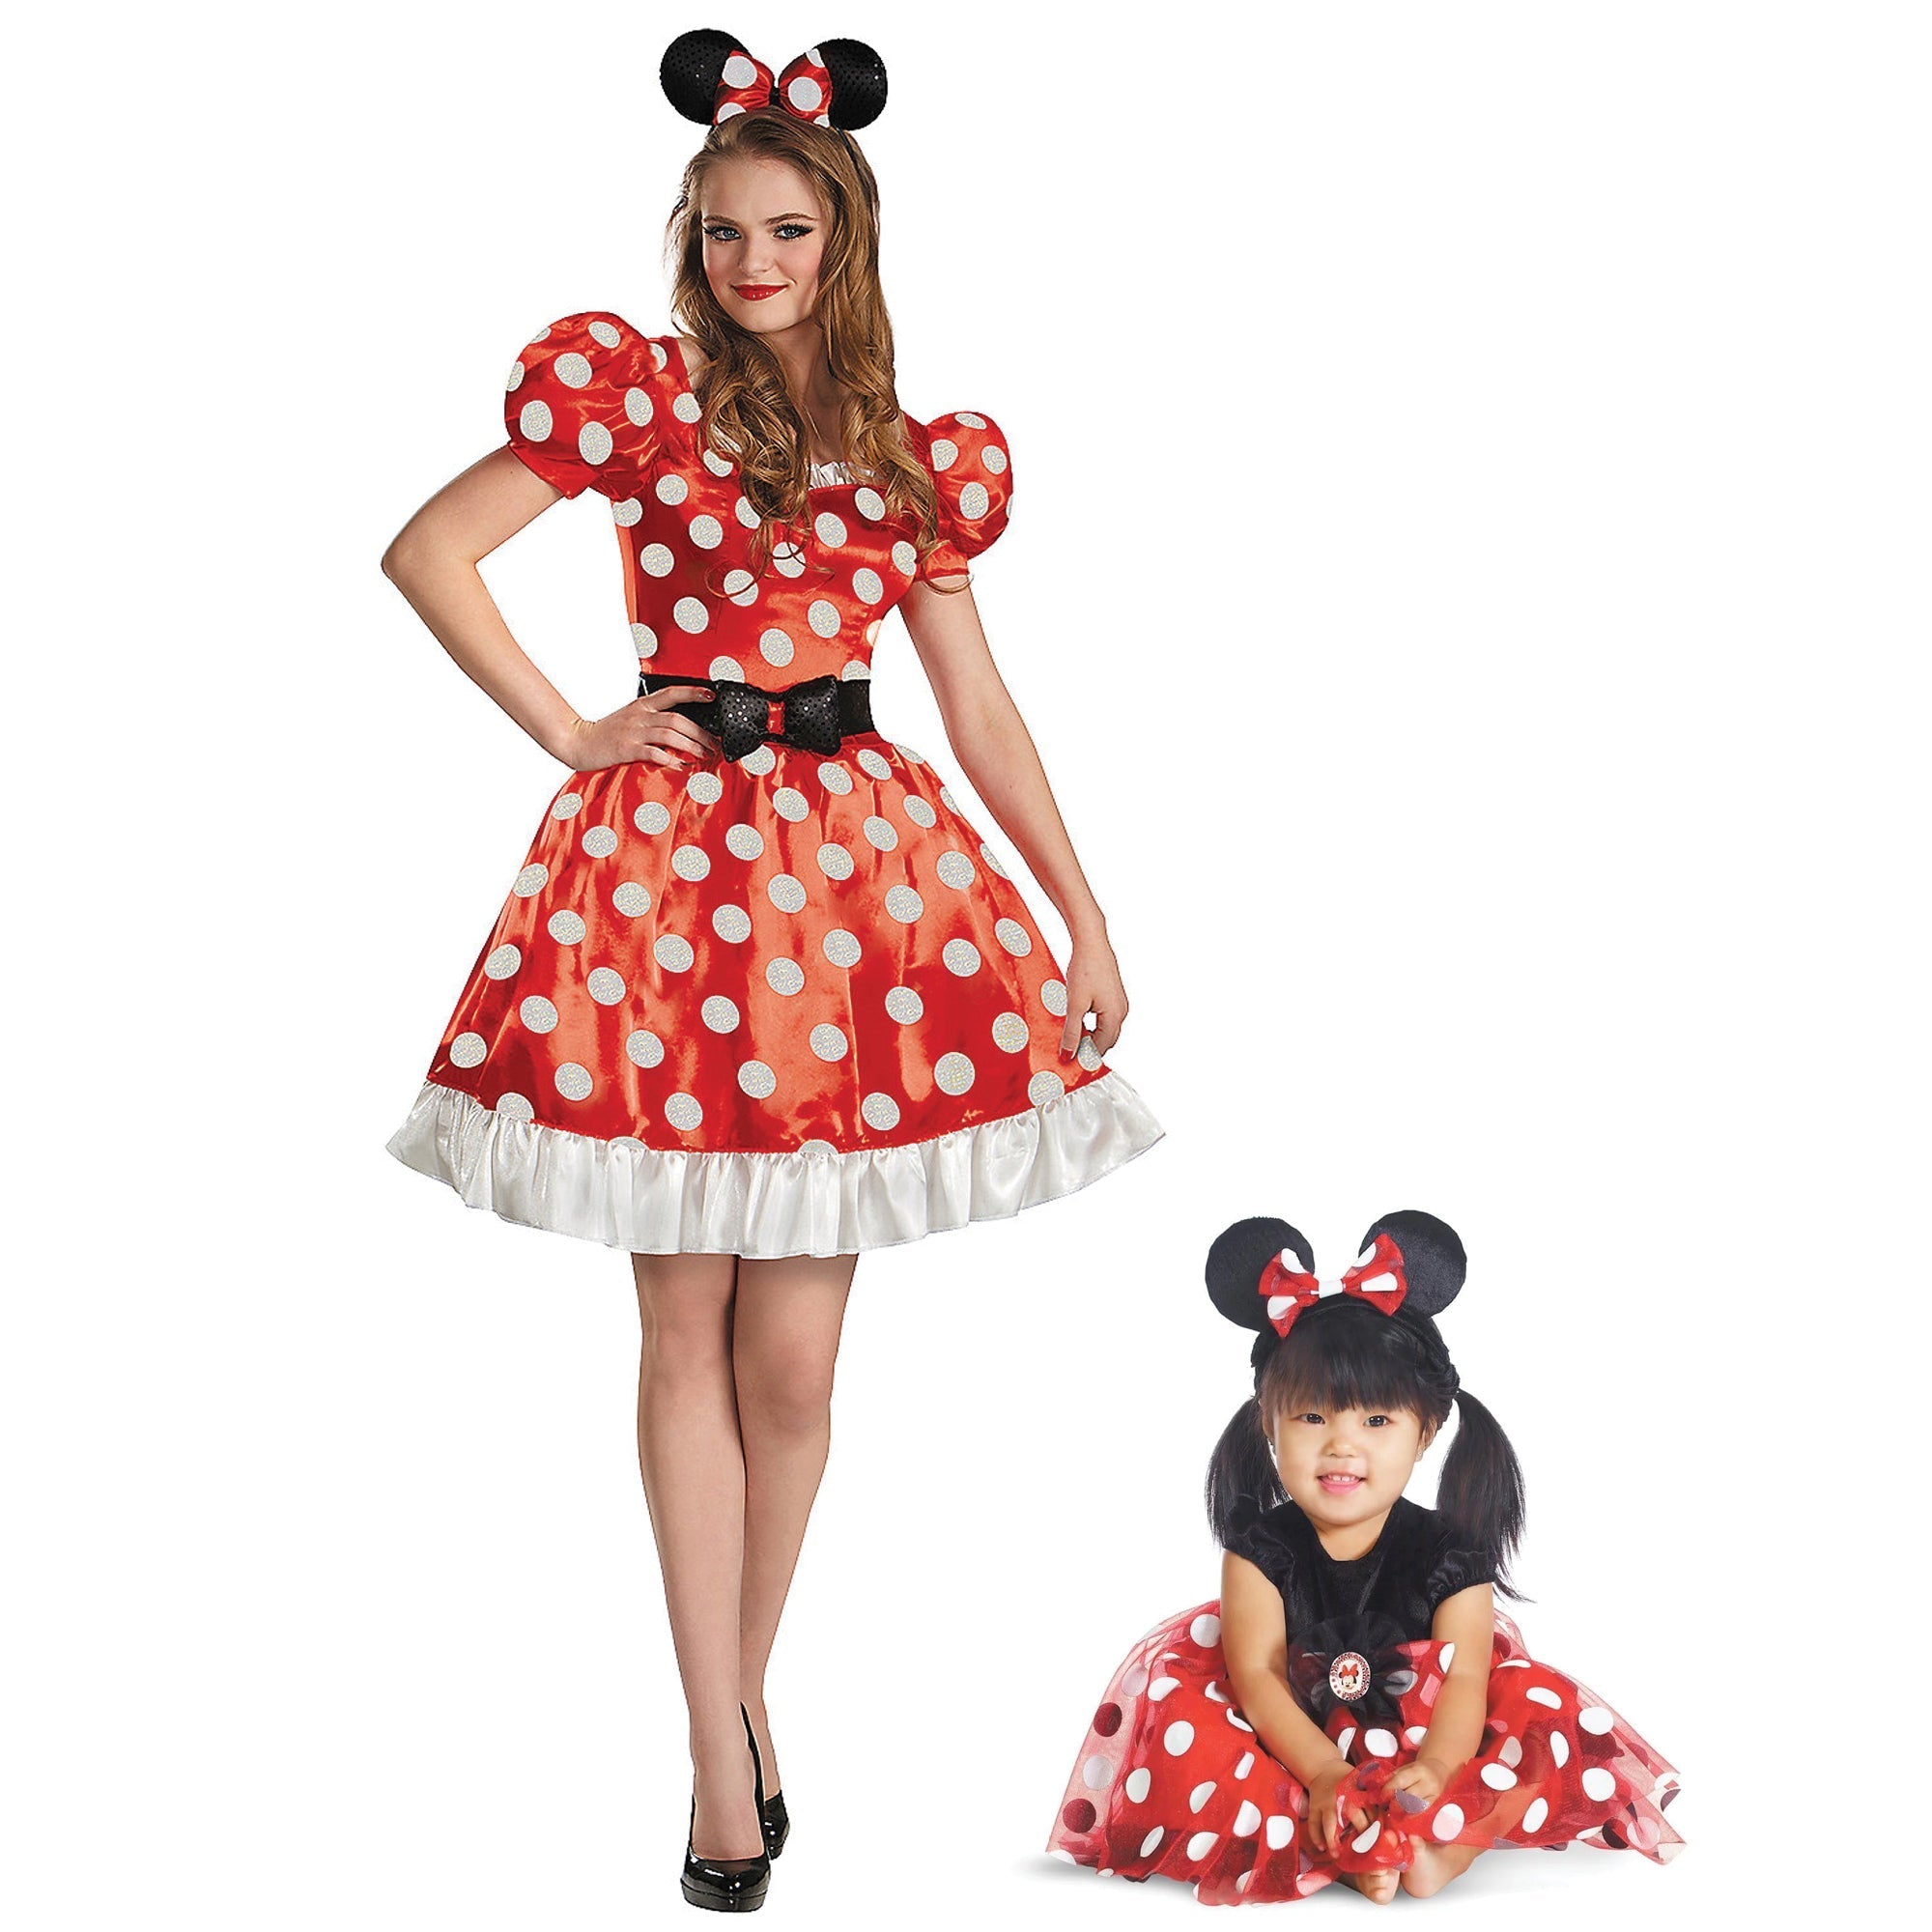 Mommy and Me Minnie Mouse Costumes